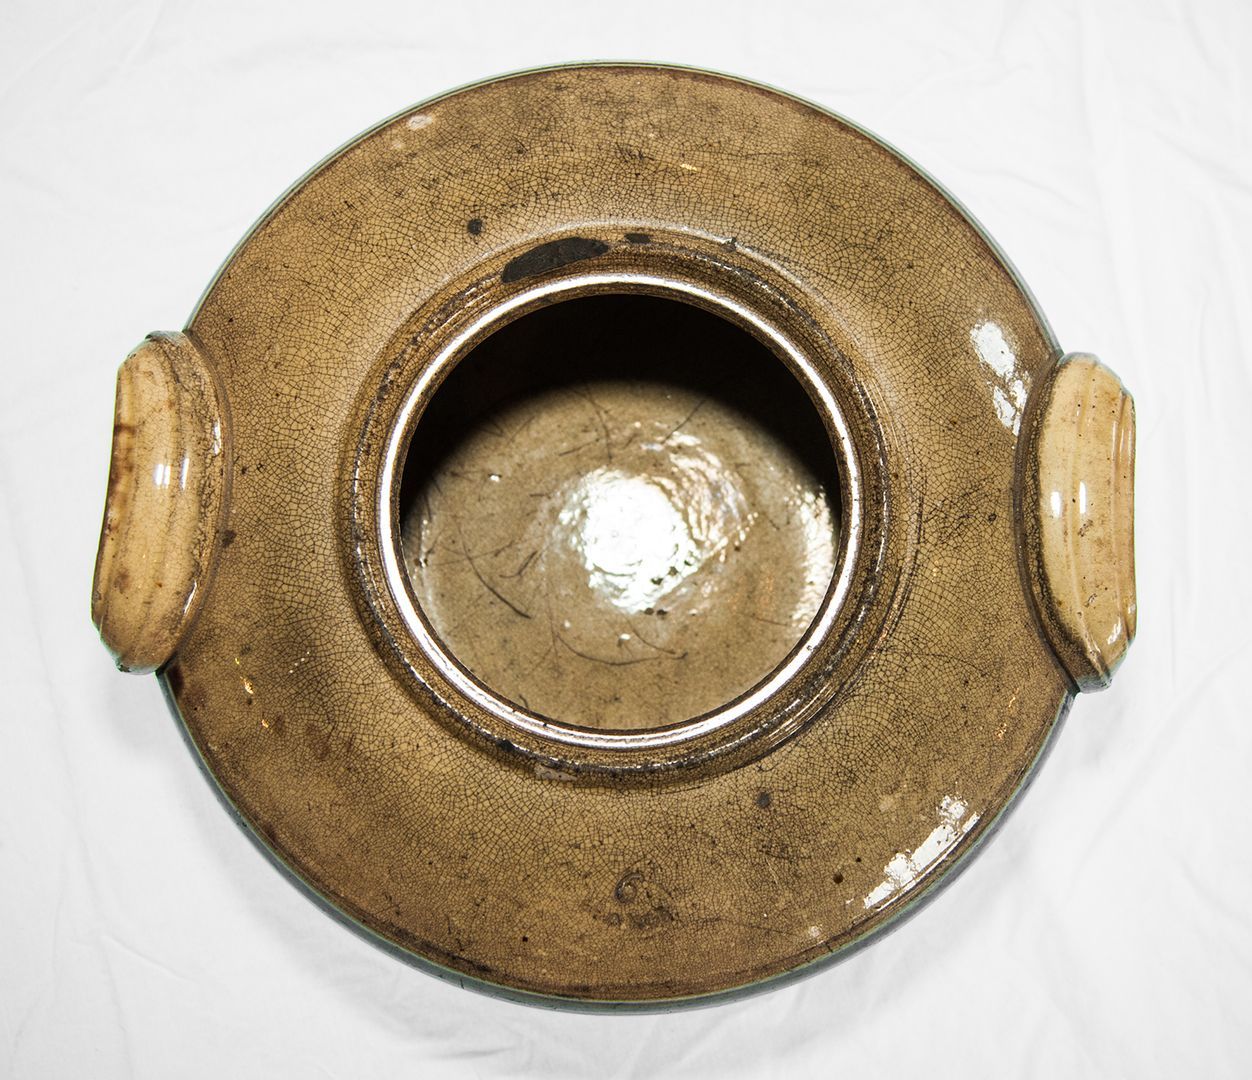 Hard to find French terra cotta tripière. Beautiful brown and cream salt glazed clay pot. Aged, crackled patina. Retains heat well and guarantees even heat distribution throughout the vessel. Factory stamp on bottom. Wonderful, authentic Provincial